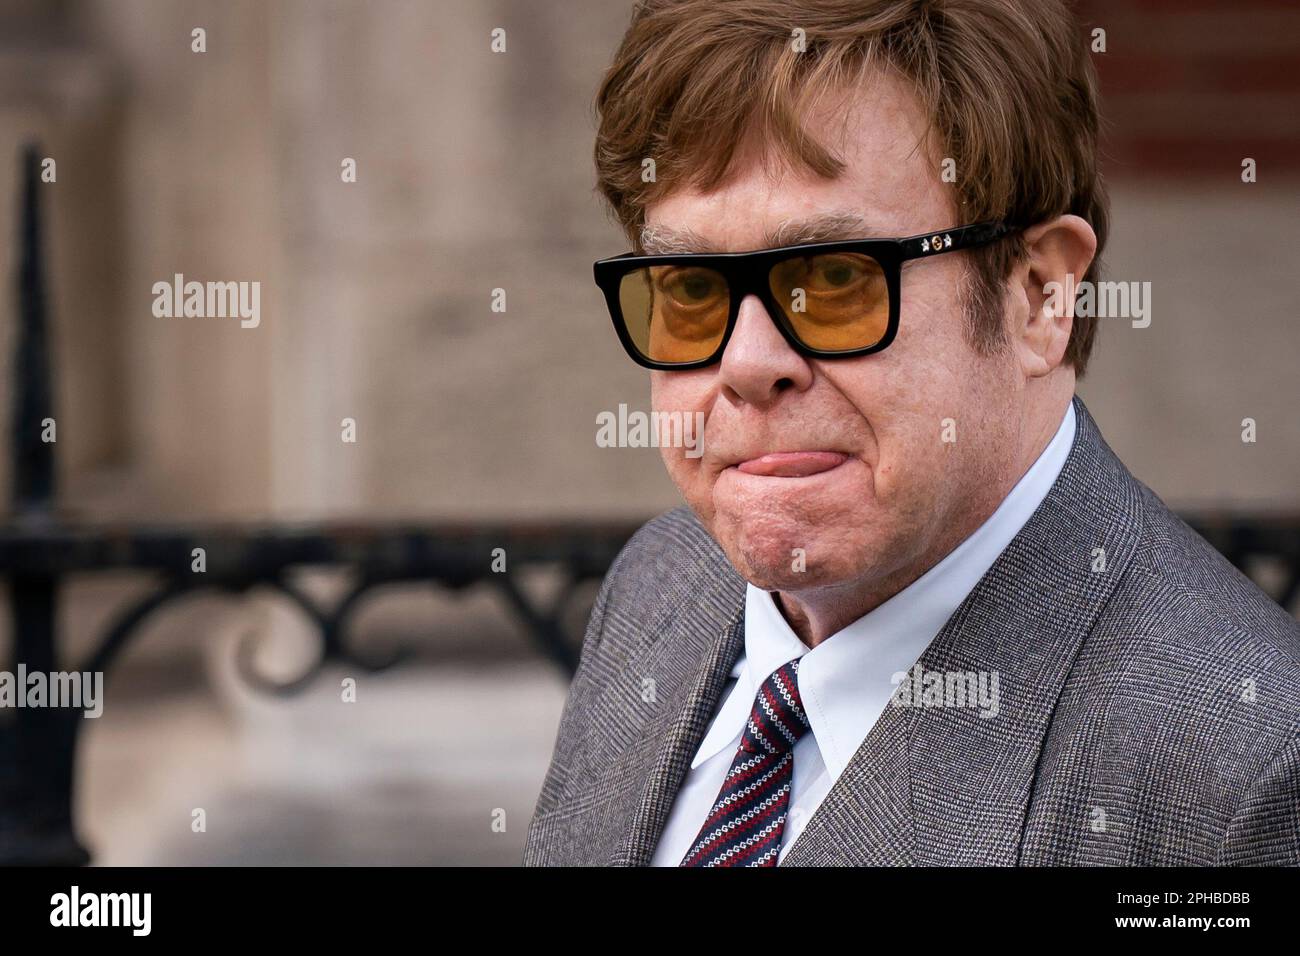 Sir Elton John leaves the Royal Courts Of Justice, central London, following a hearing claim over allegations of unlawful information gathering brought against Associated Newspapers Limited (ANL) by seven people - the Duke of Sussex, Baroness Doreen Lawrence, Sir Elton John, David Furnish, Liz Hurley, Sadie Frost and Sir Simon Hughes. Picture date: Monday March 27, 2023. Stock Photo